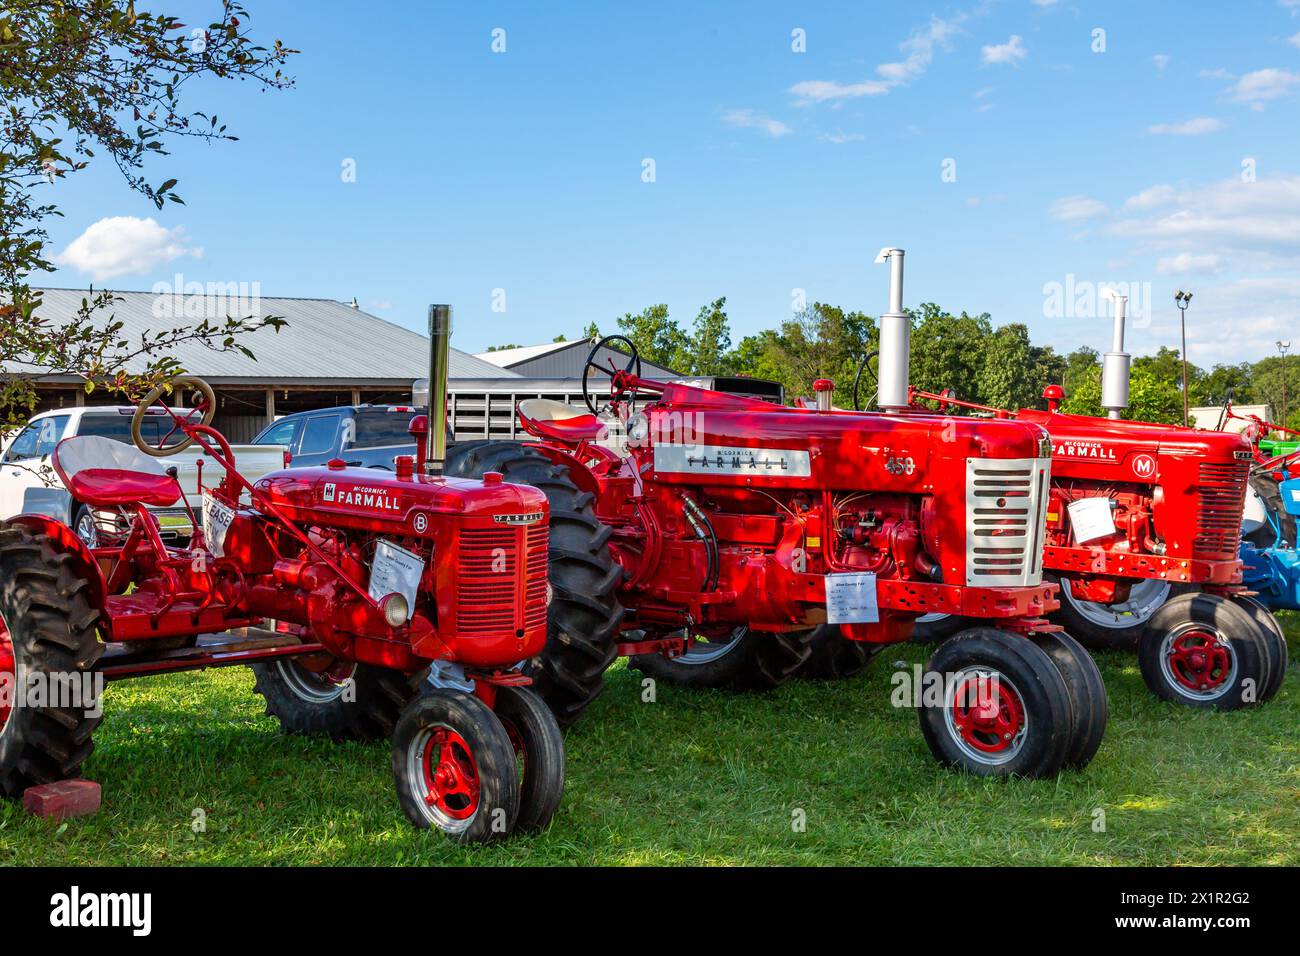 Three antique International Harvester McCormick Farmall tractors on display in a tractor show at the Allen County Fairgrounds in Fort Wayne, Indiana. Stock Photo